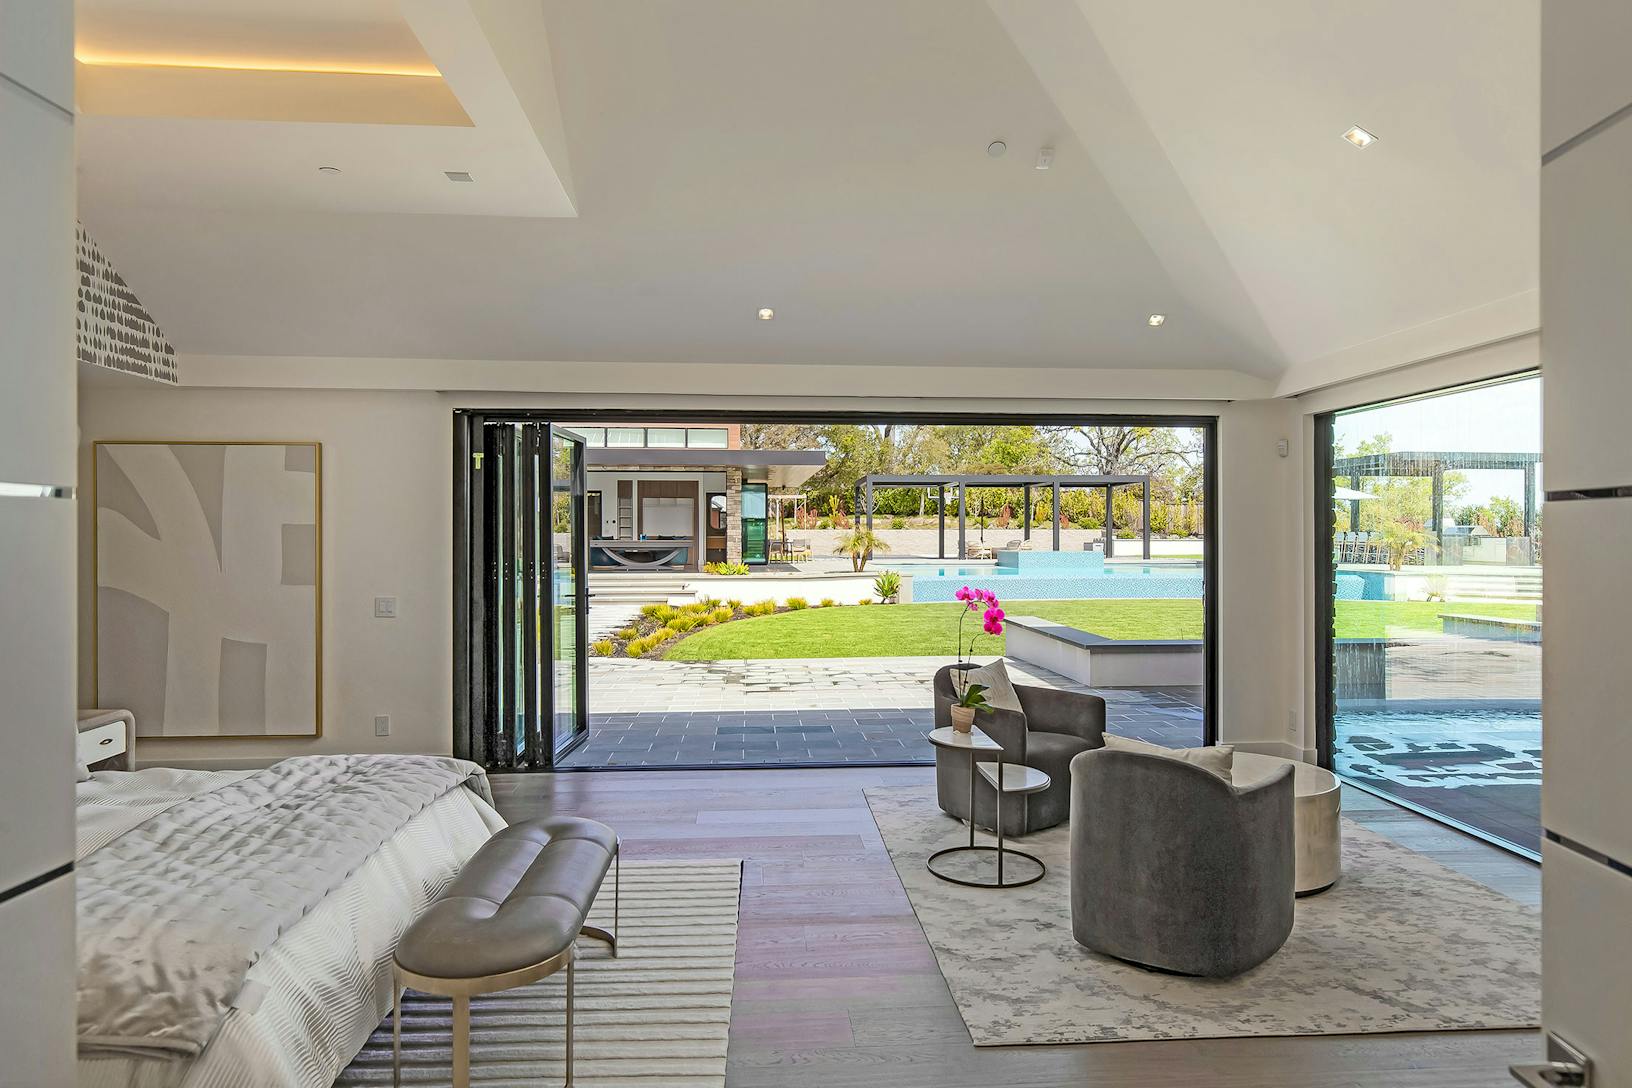 A bedroom with bifold glass walls leading to a pool